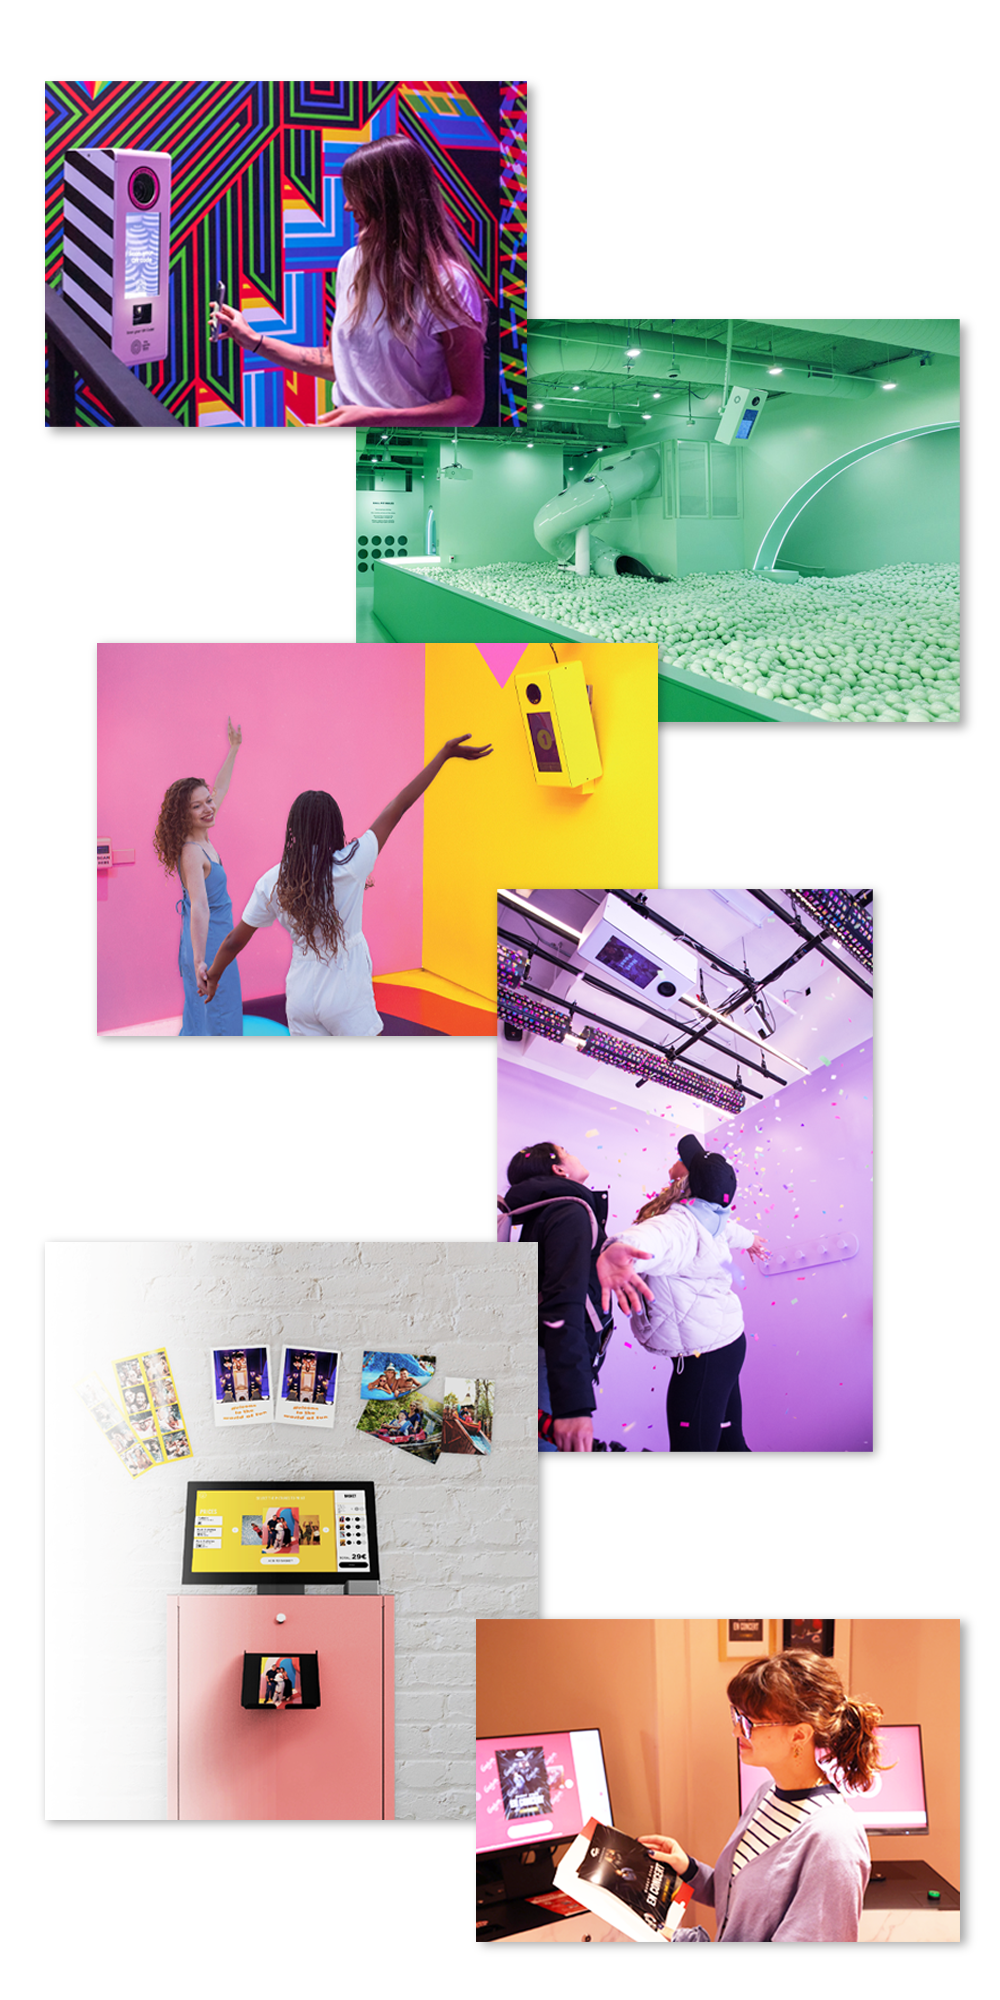 Collage of Scan & Capture experiences featuring a green screen setup, photo printing, and joyful participants.